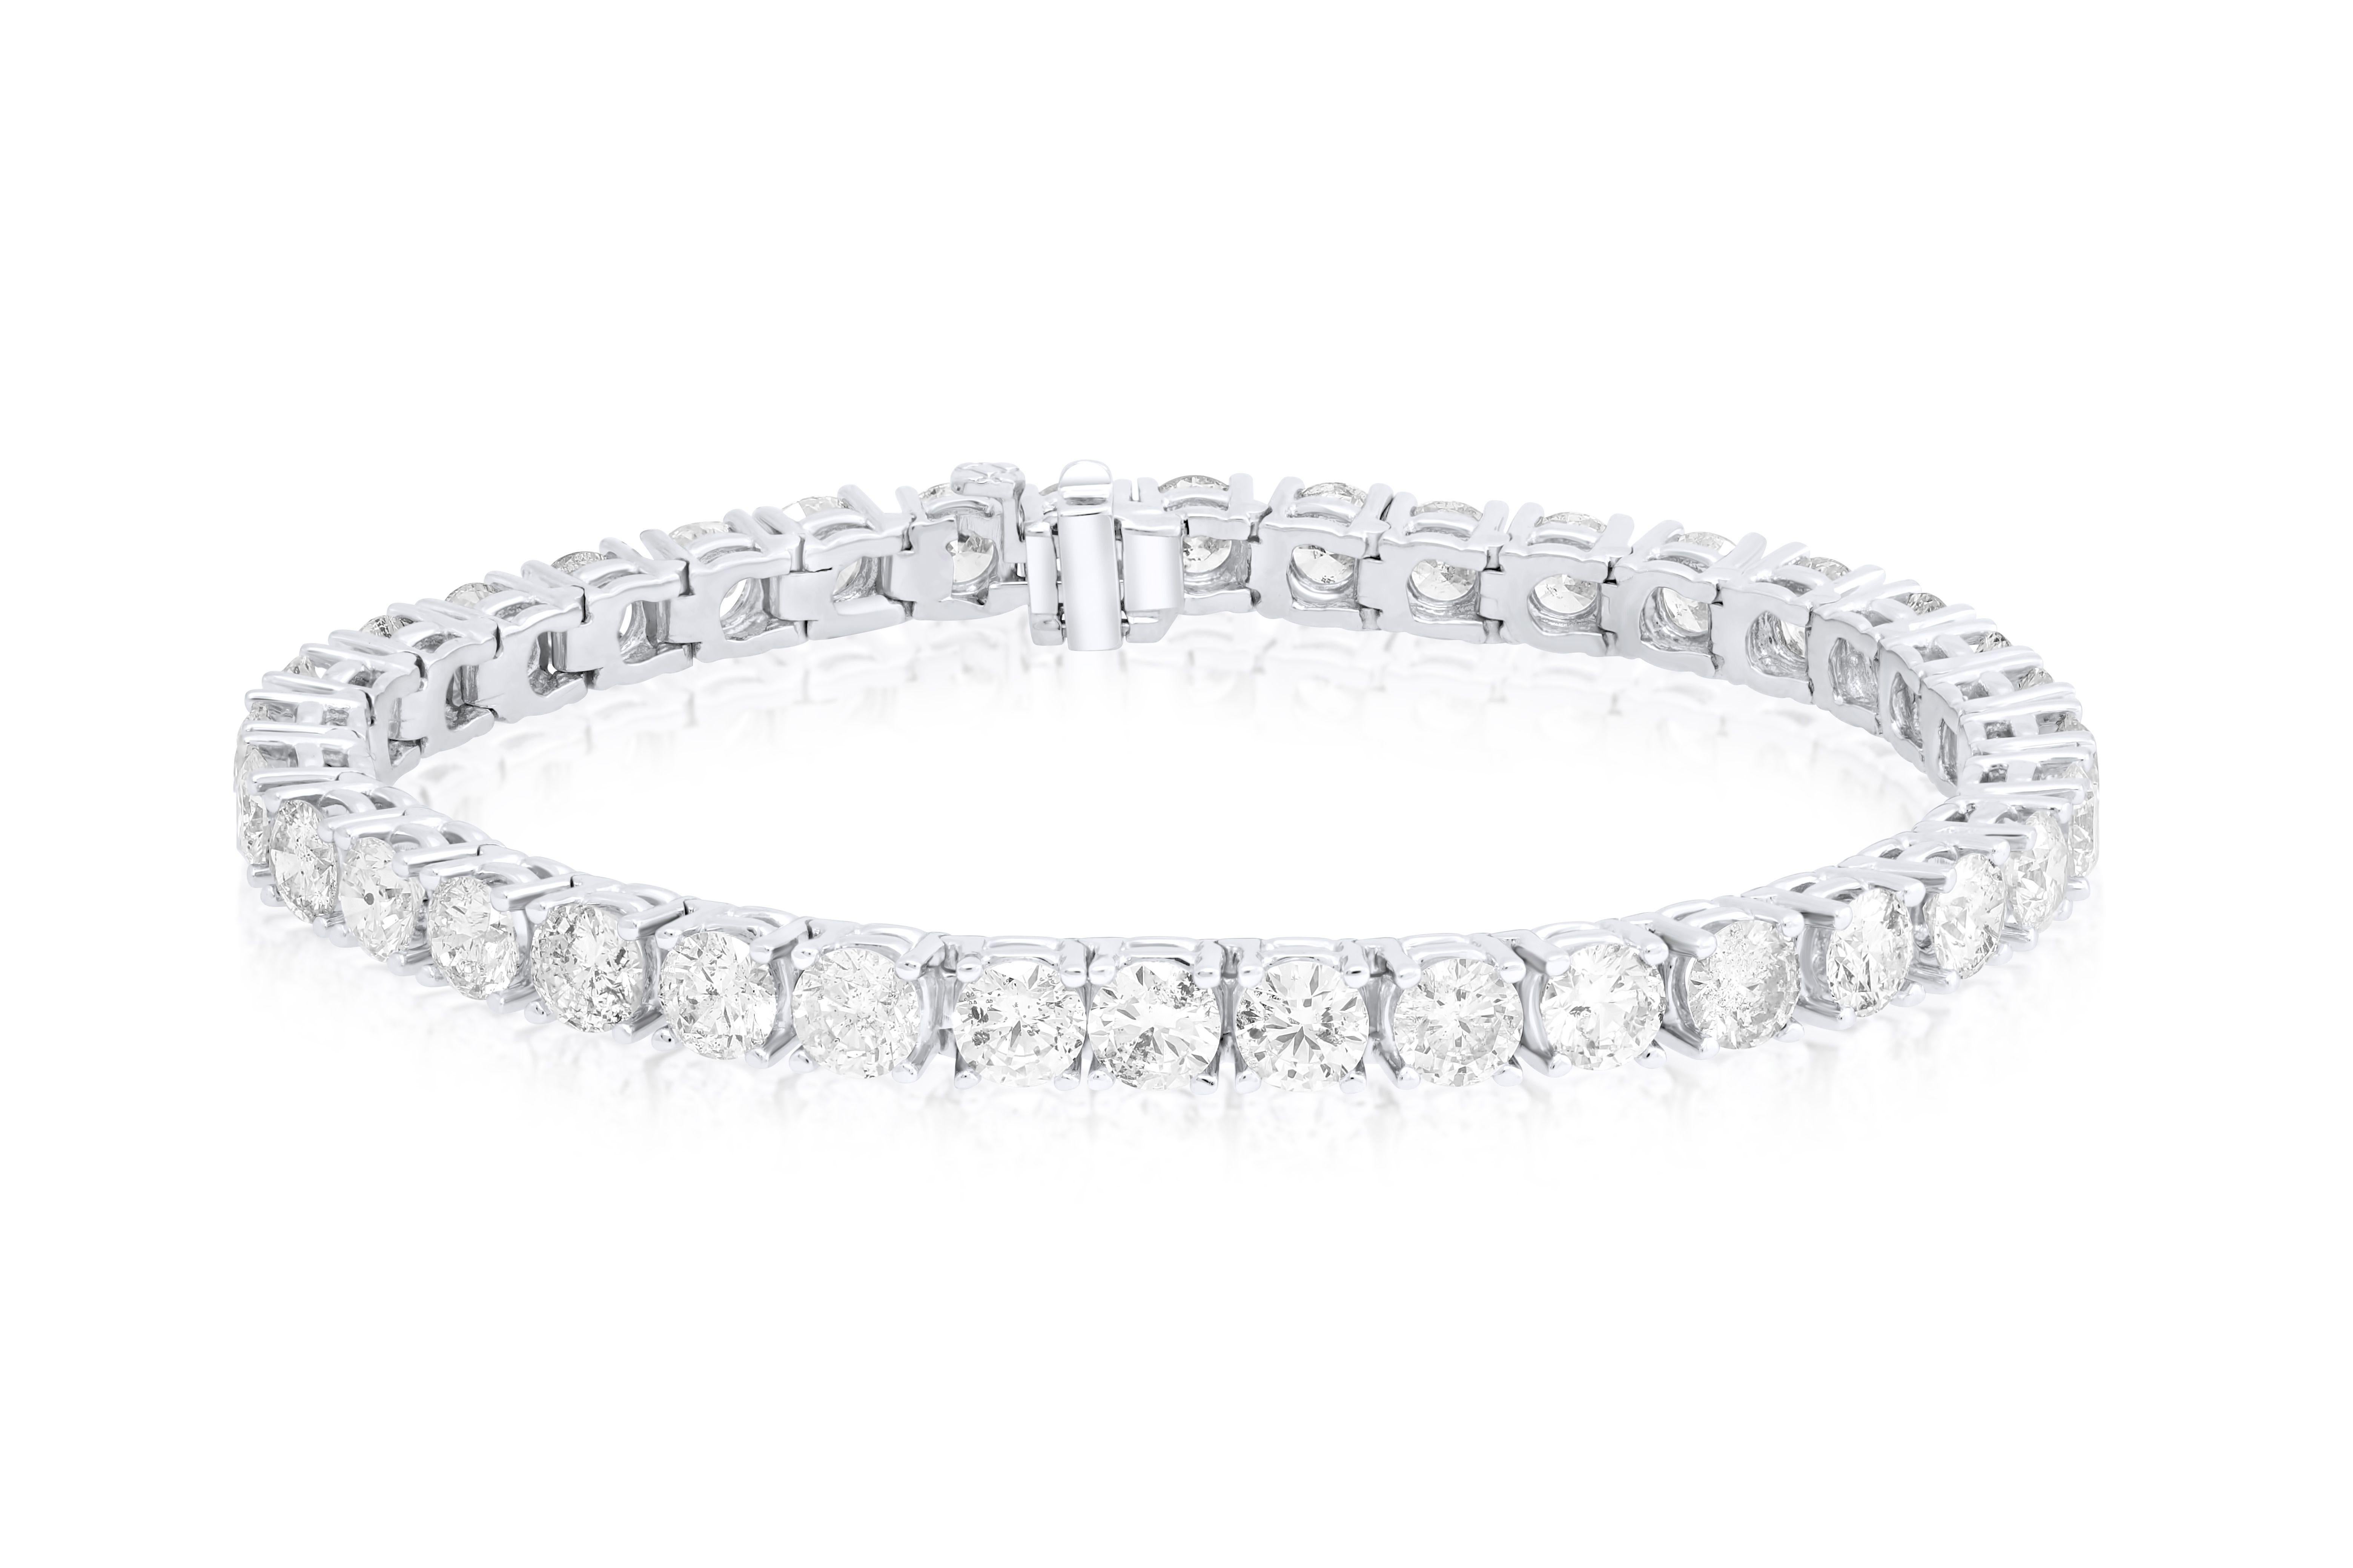 18 kt white gold 4 prong diamond tennis bracelet adorned with 15.85 cts tw of round diamonds (33 stones) 
Diana M. is a leading supplier of top-quality fine jewelry for over 35 years.
Diana M is one-stop shop for all your jewelry shopping, carrying